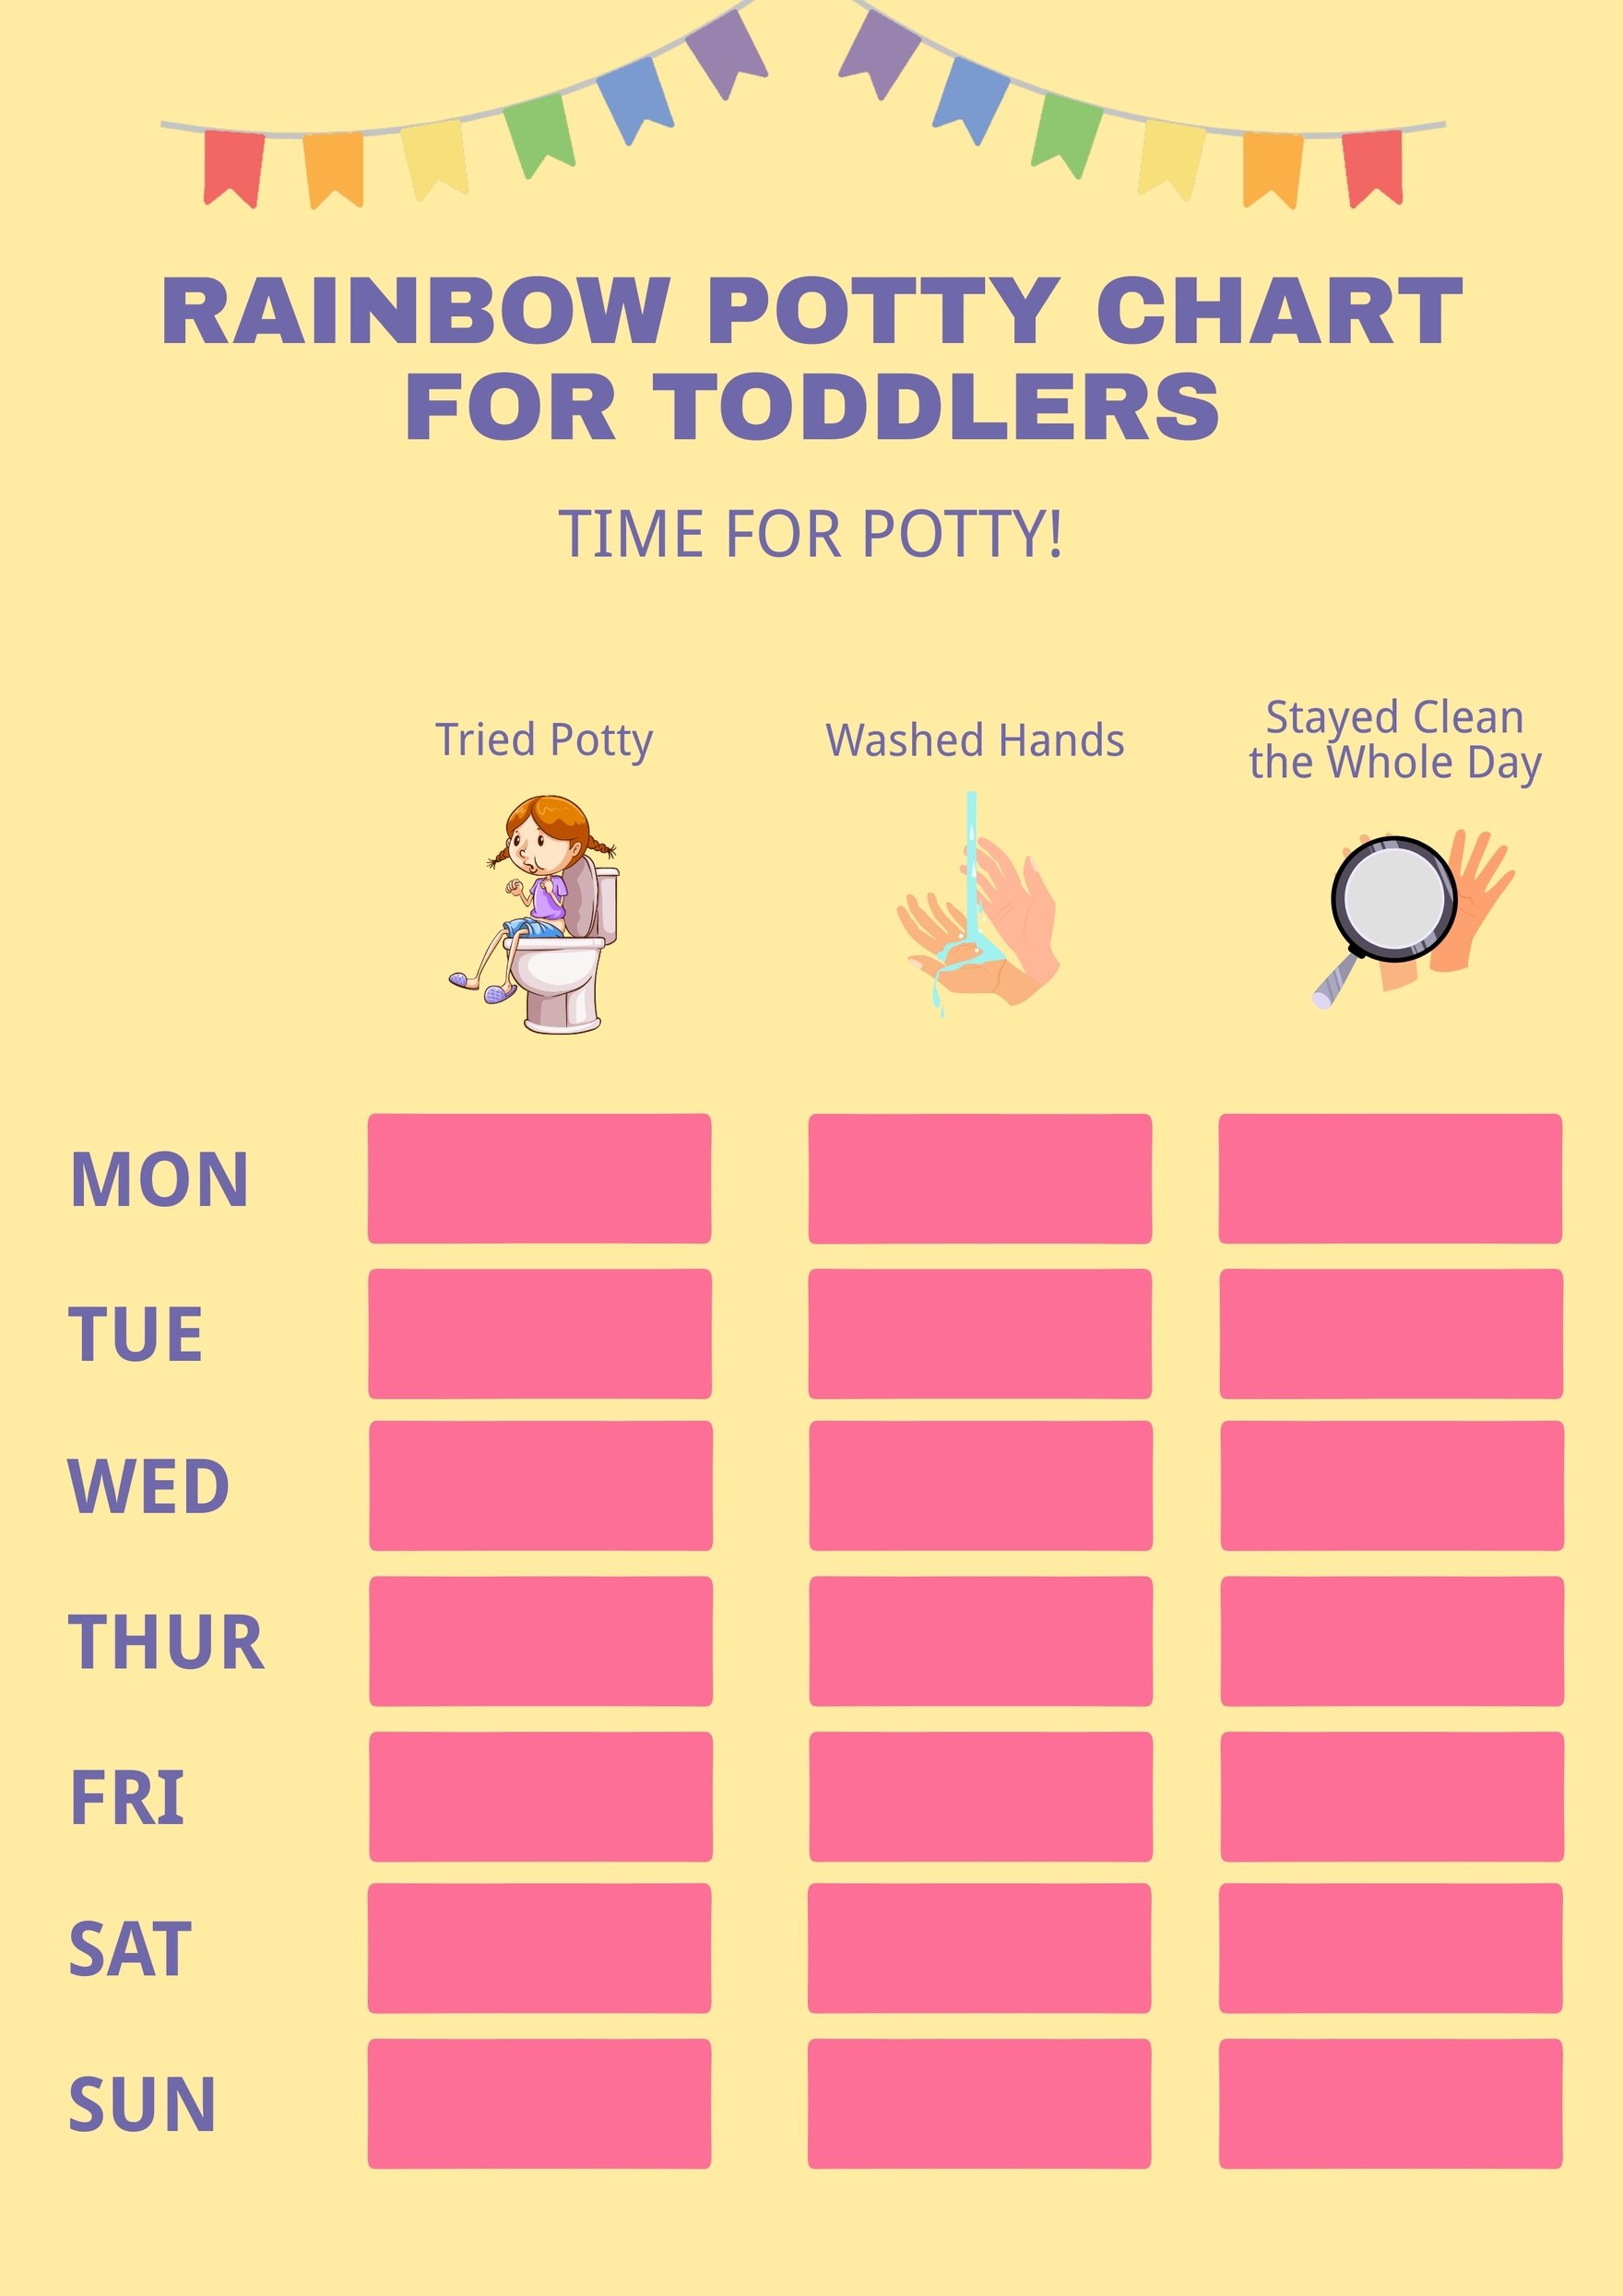 rainbow-potty-chart-for-toddlers